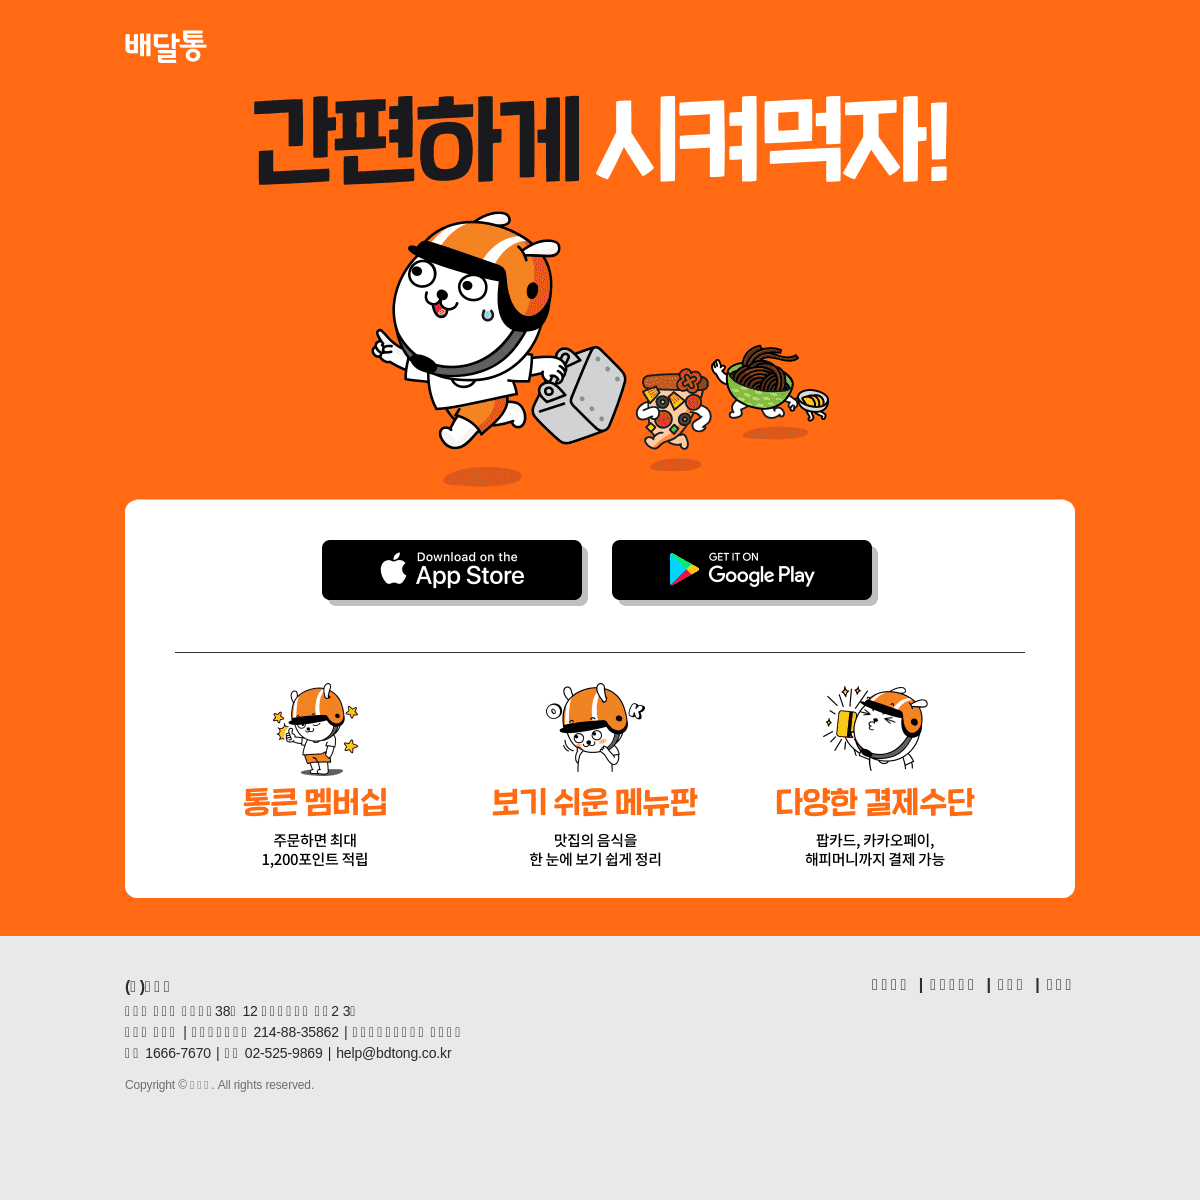 A complete backup of bdtong.co.kr